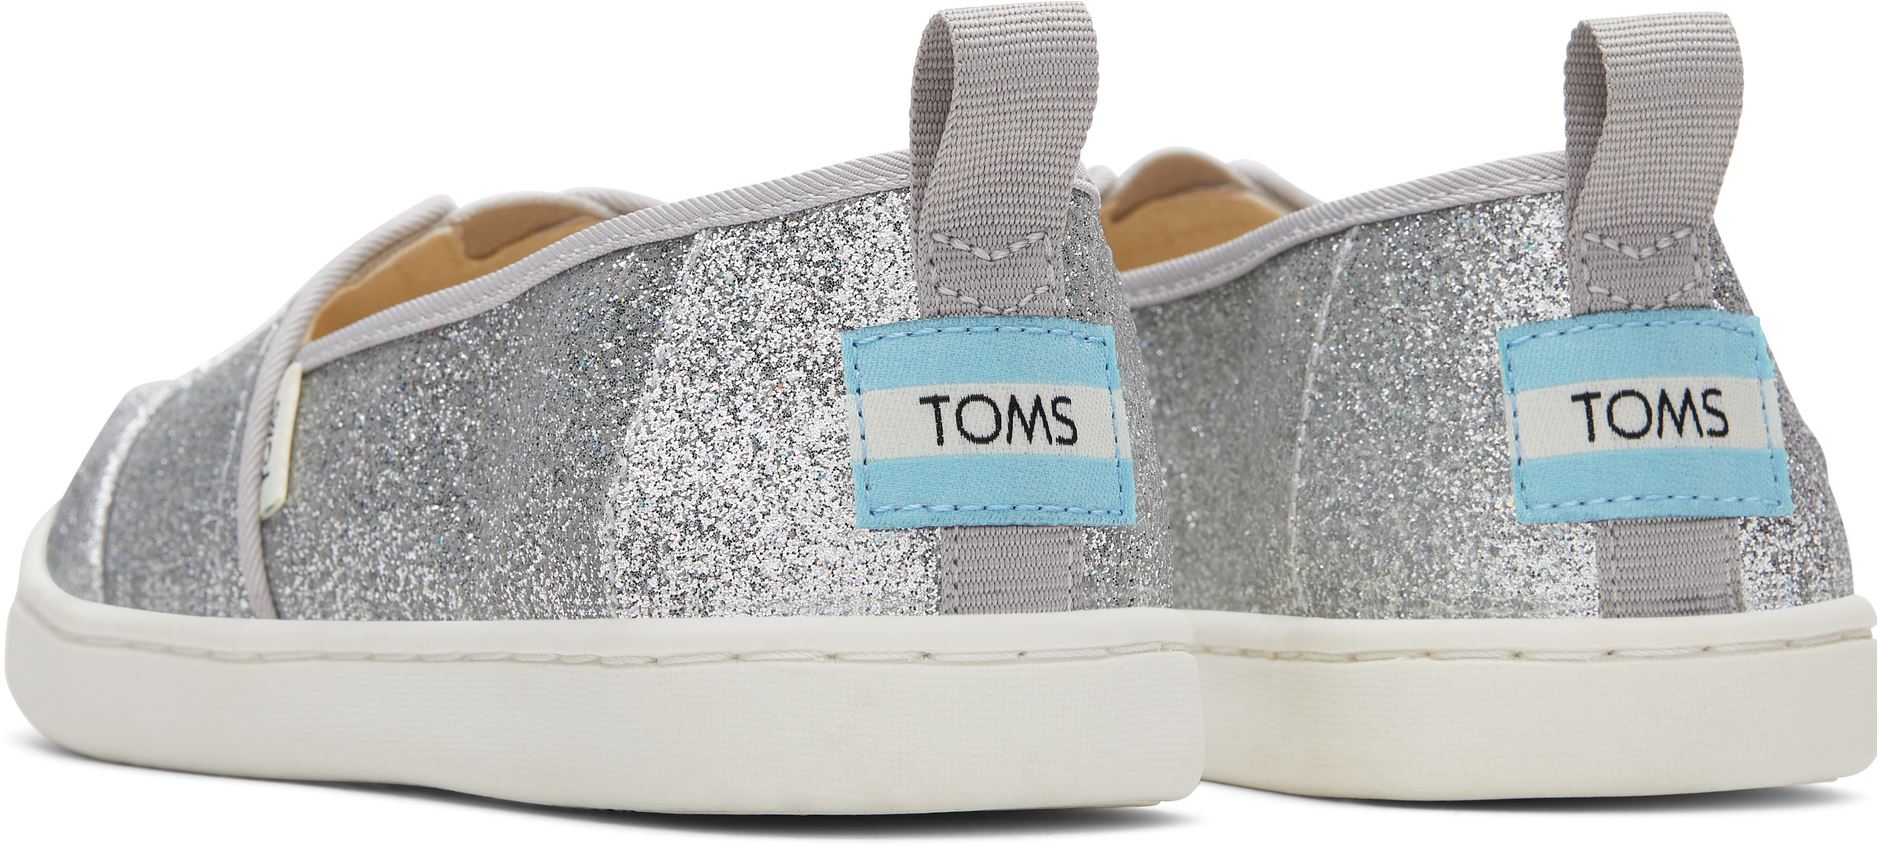 A girls canvas shoe by TOMS, style Alpargata, a slip on in silver glitter. Back view of a pair.